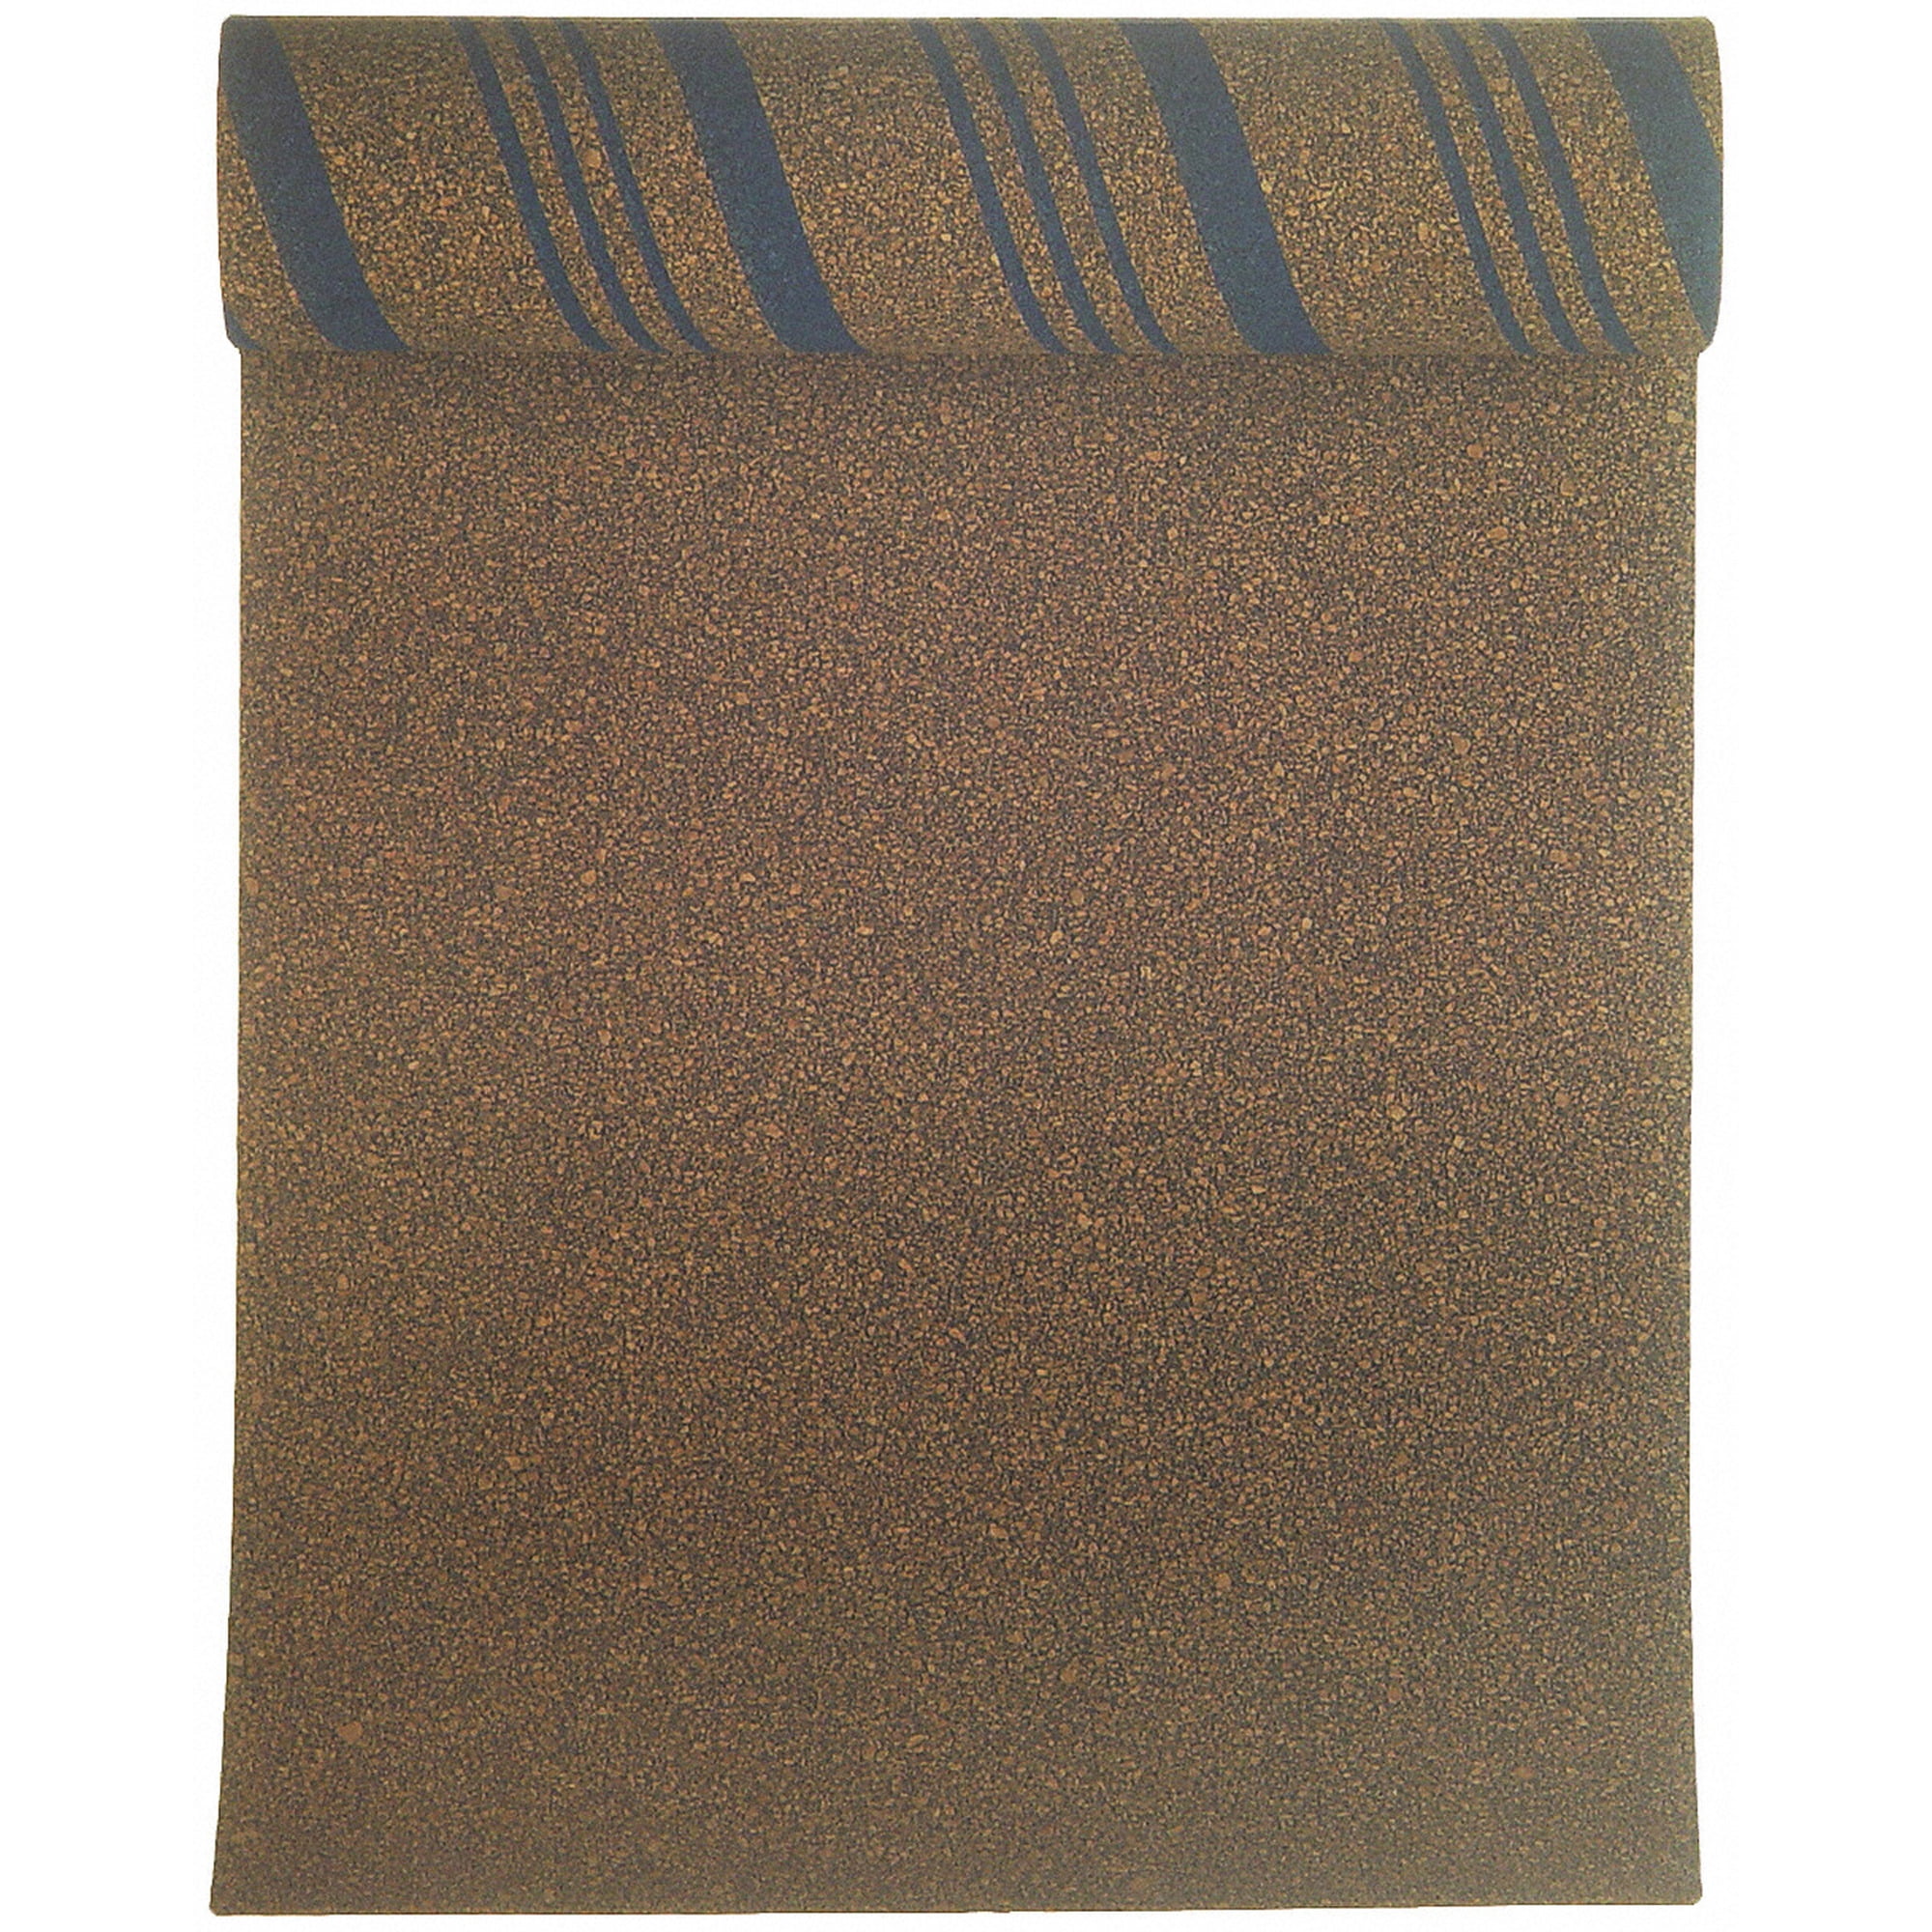 Cork-rubber Gasket Sheet Excellent Material for Sealing oil, Coolant or Gasoline- Paidu Suppliers